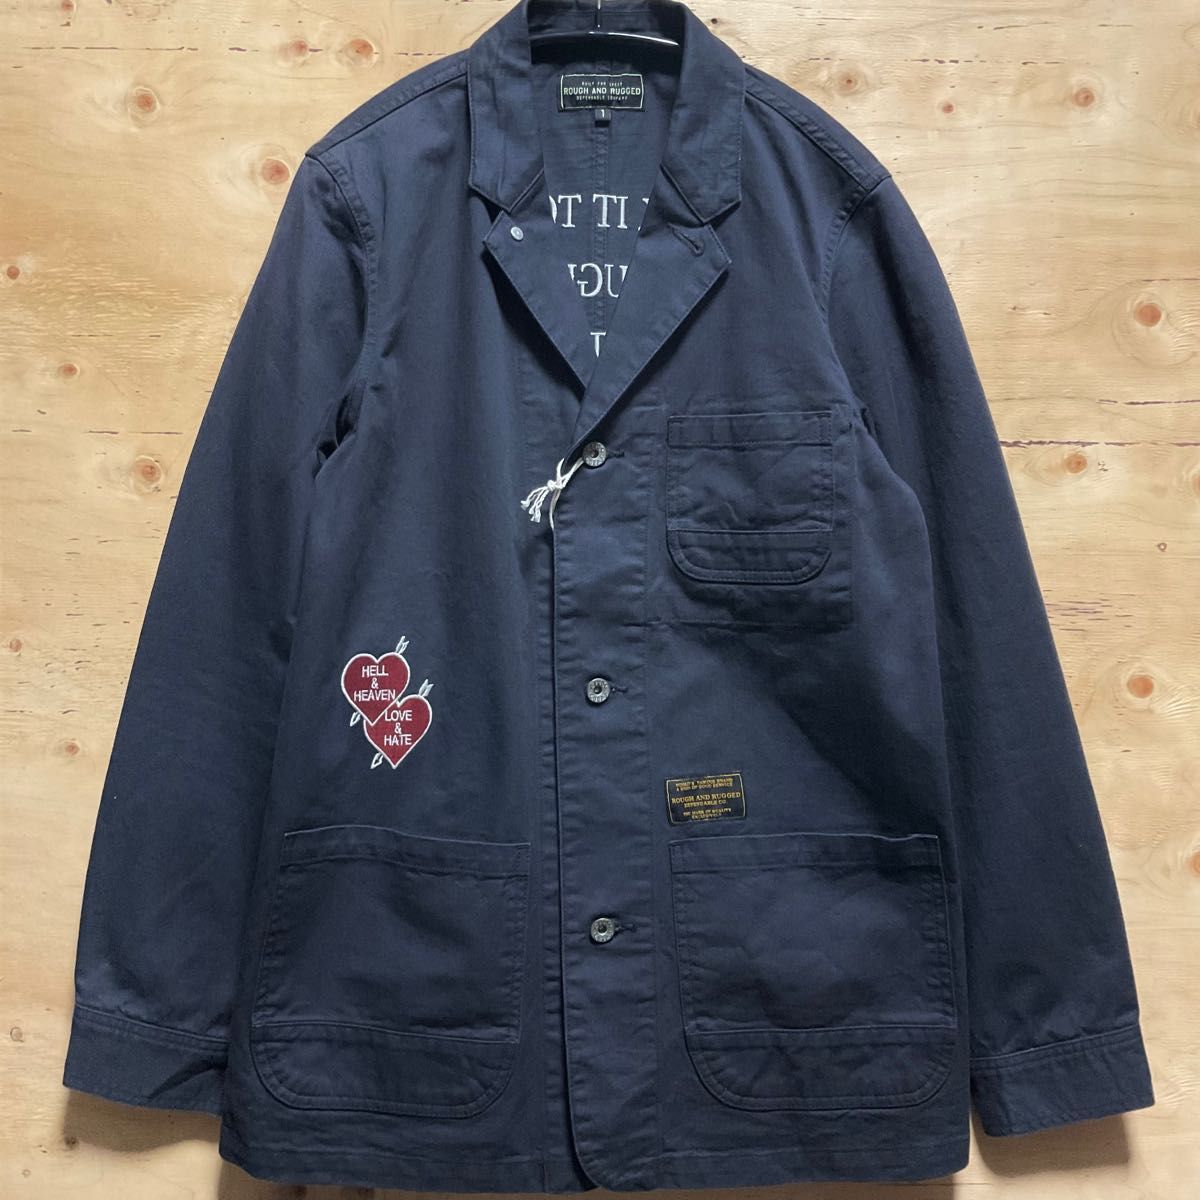 R&R EMBROIDERY COVERALL JACKET BLK 未使用品 Yahoo!フリマ（旧）のサムネイル